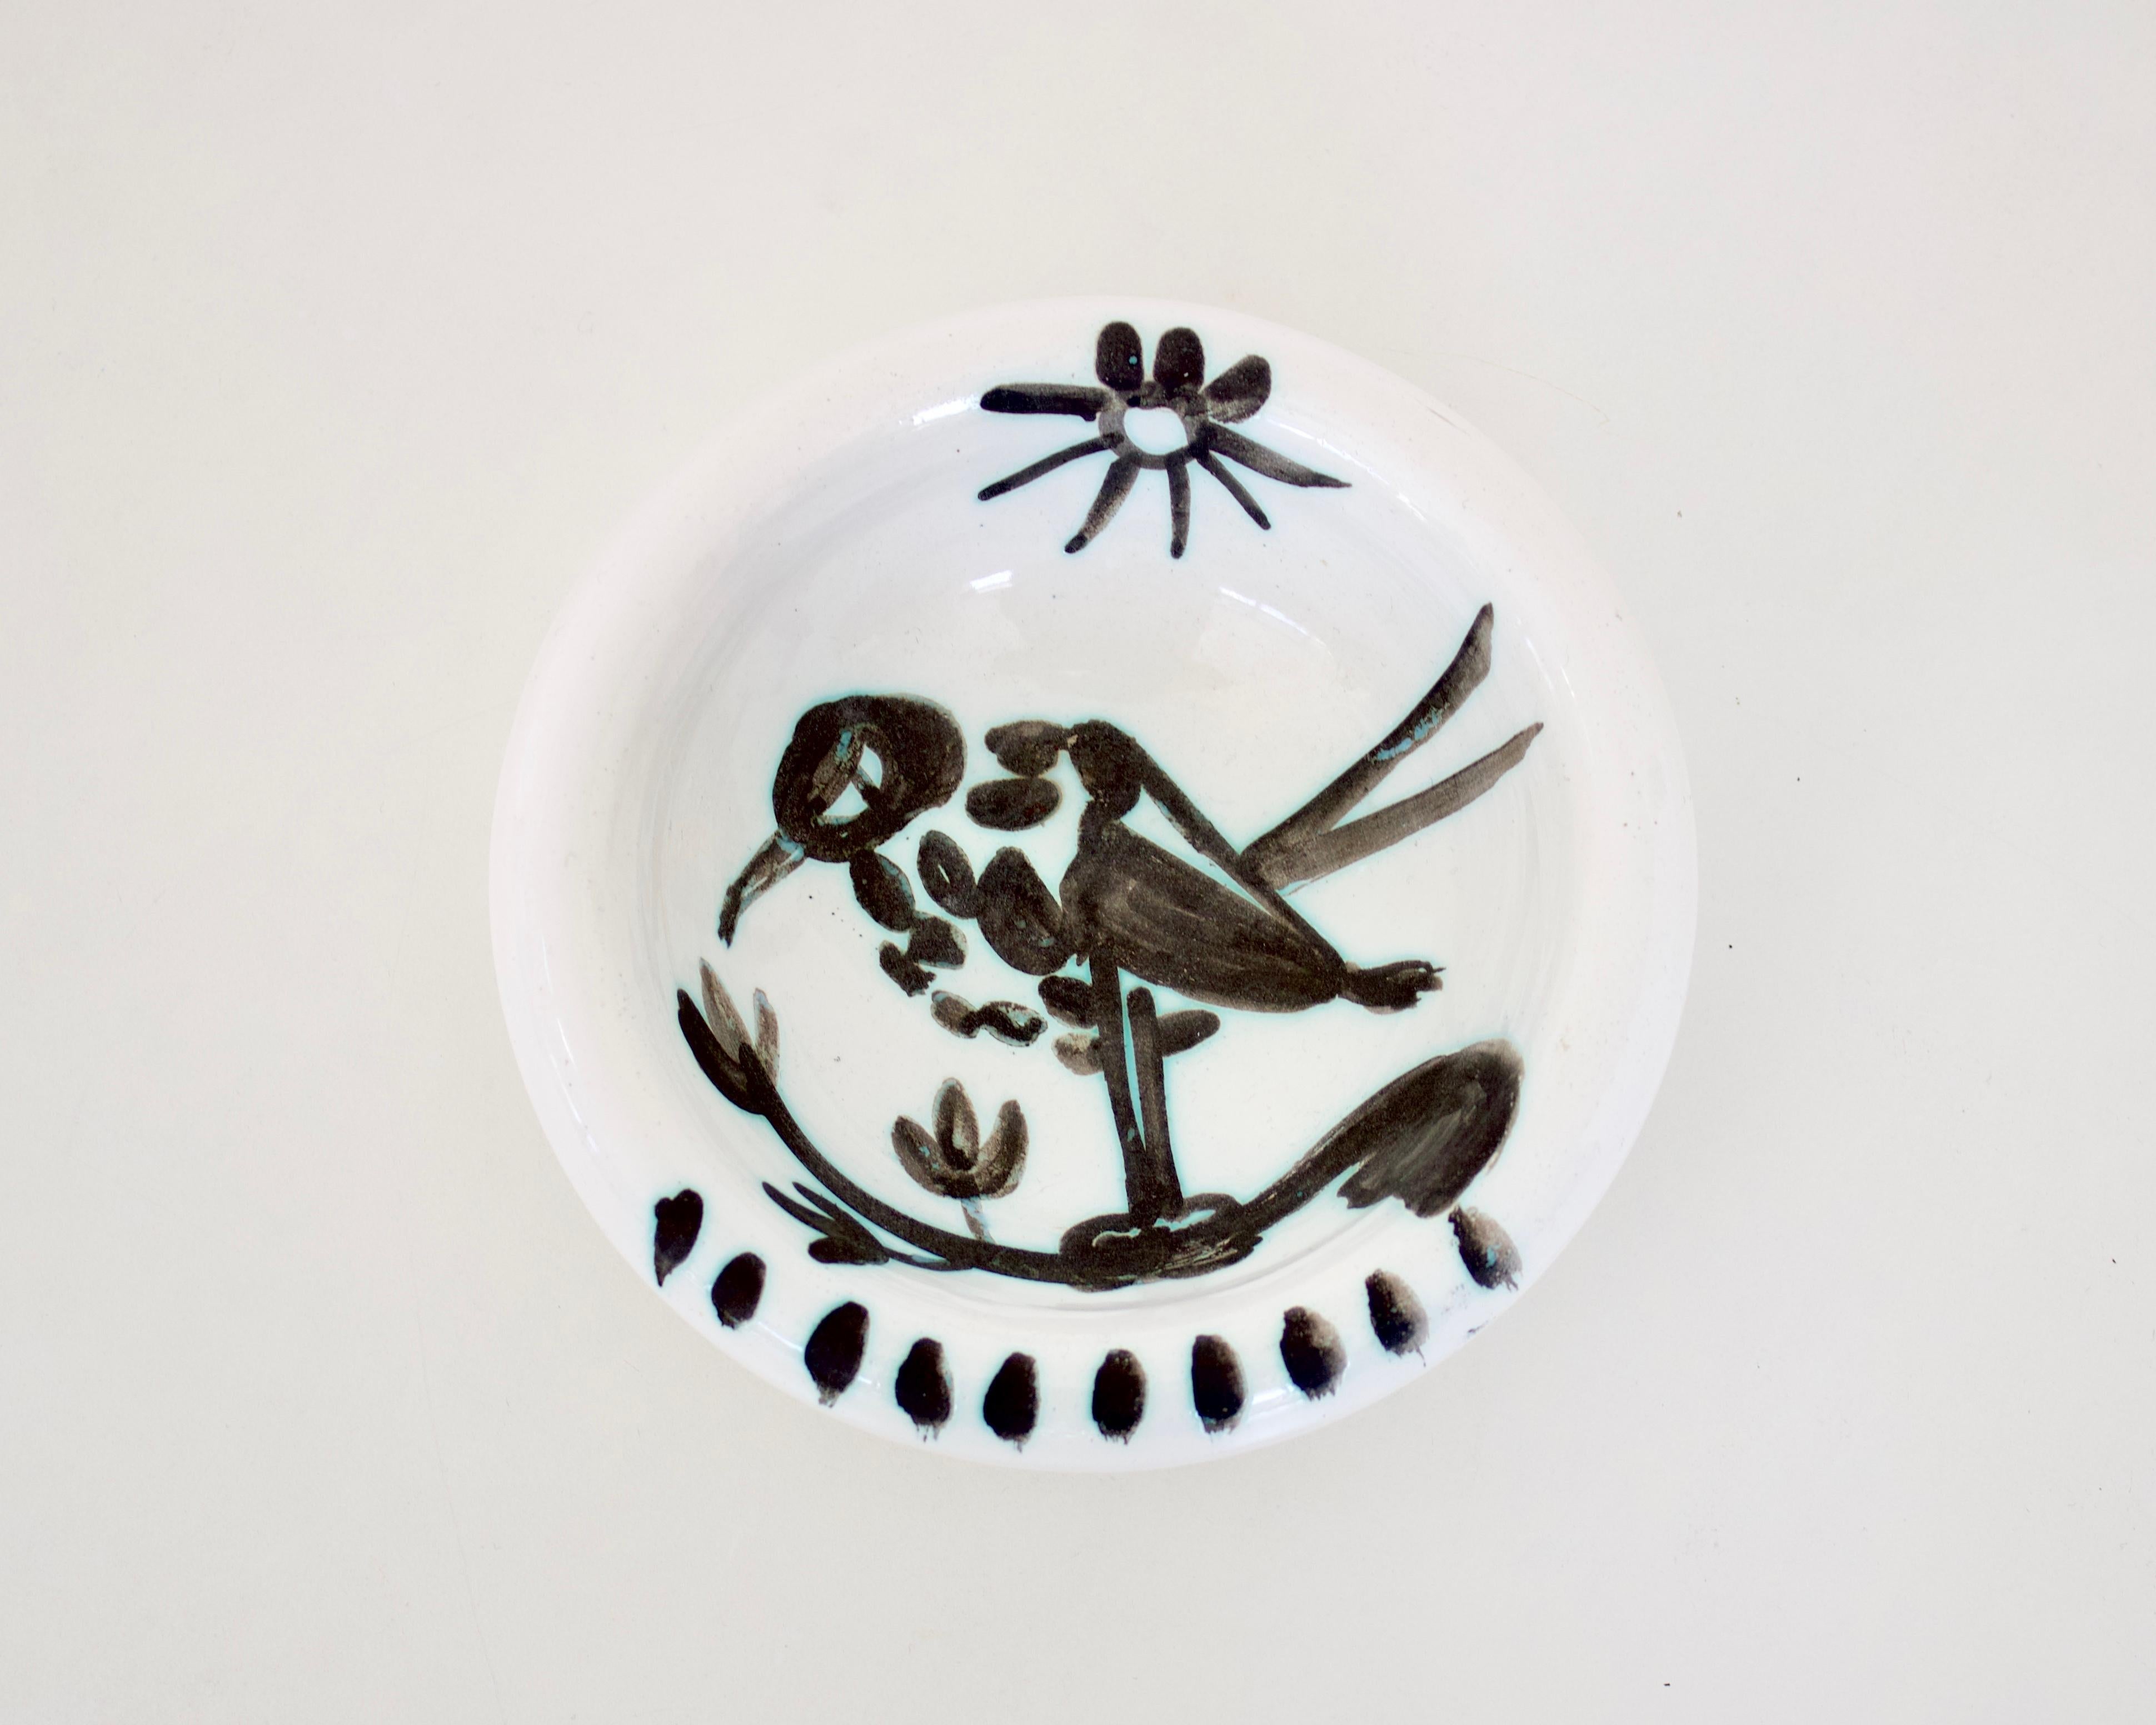 Pablo Picasso Oiseau dish bird with sun, editions Picasso Madoura France, circa 1952. 15 hand painted brush strokes under the birds feet referring to food. 
Impressed with mark to underside Madoura Plein Feu edition Picasso and also with edition